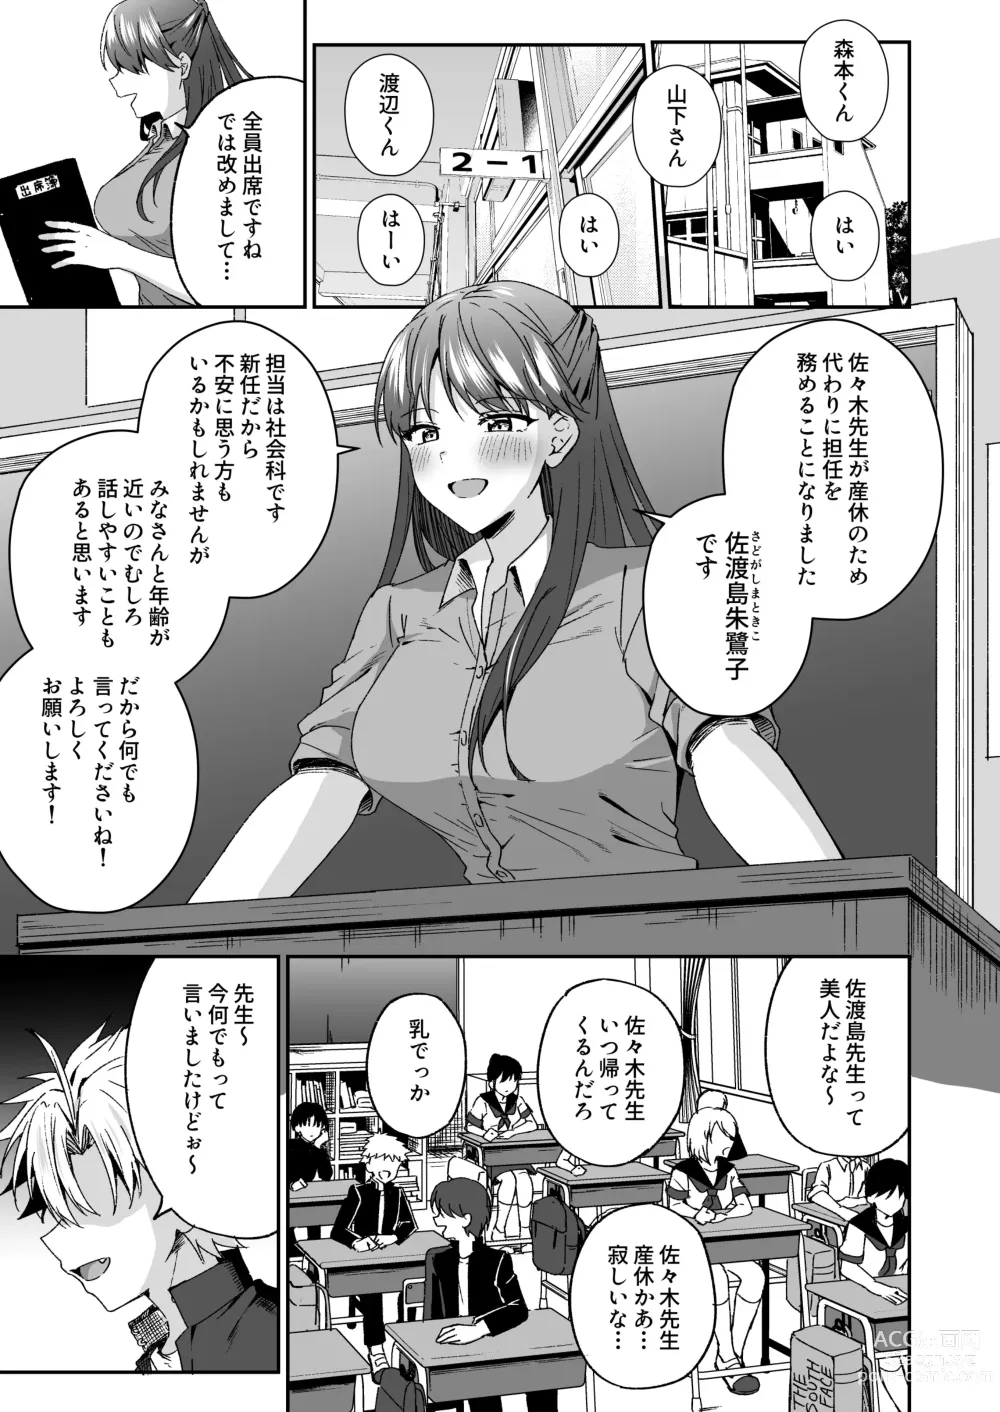 Page 2 of doujinshi A story about a delinquent boy who gets chastity belt ejaculation control reverse anal sex by a female teacher who is a nymphomaniac